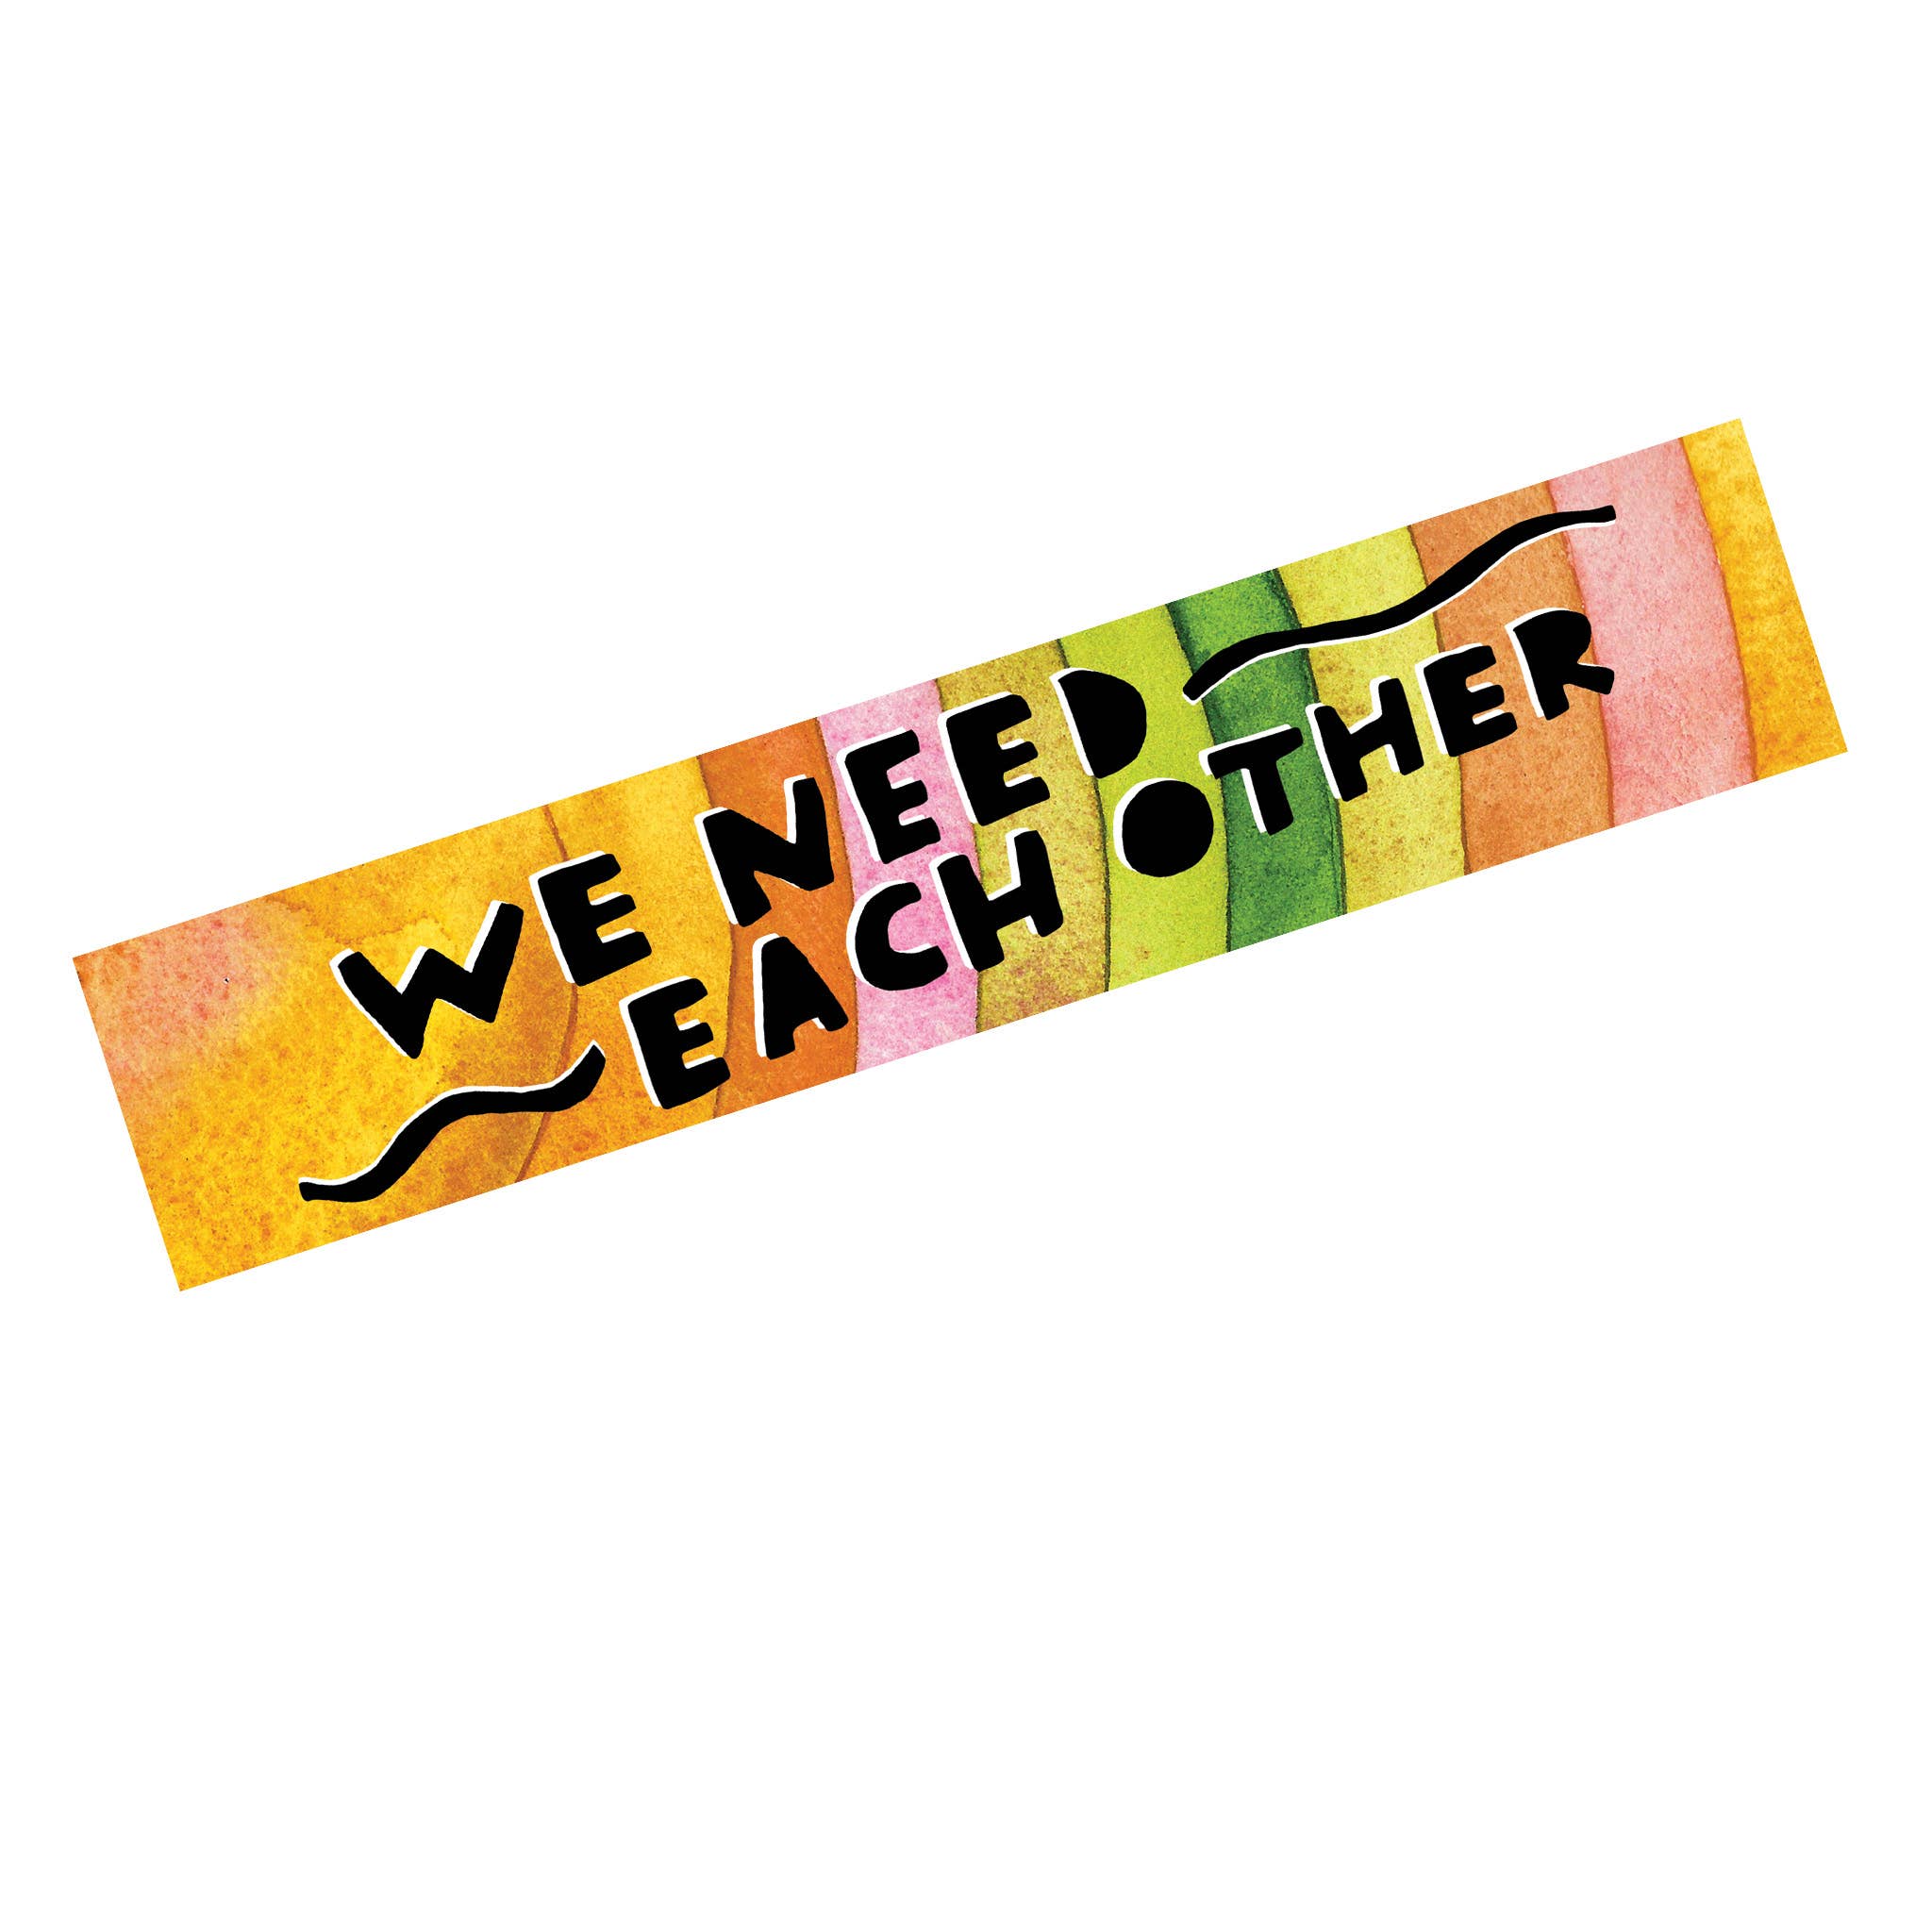 We Need Each Other | Sticker - Spiral Circle